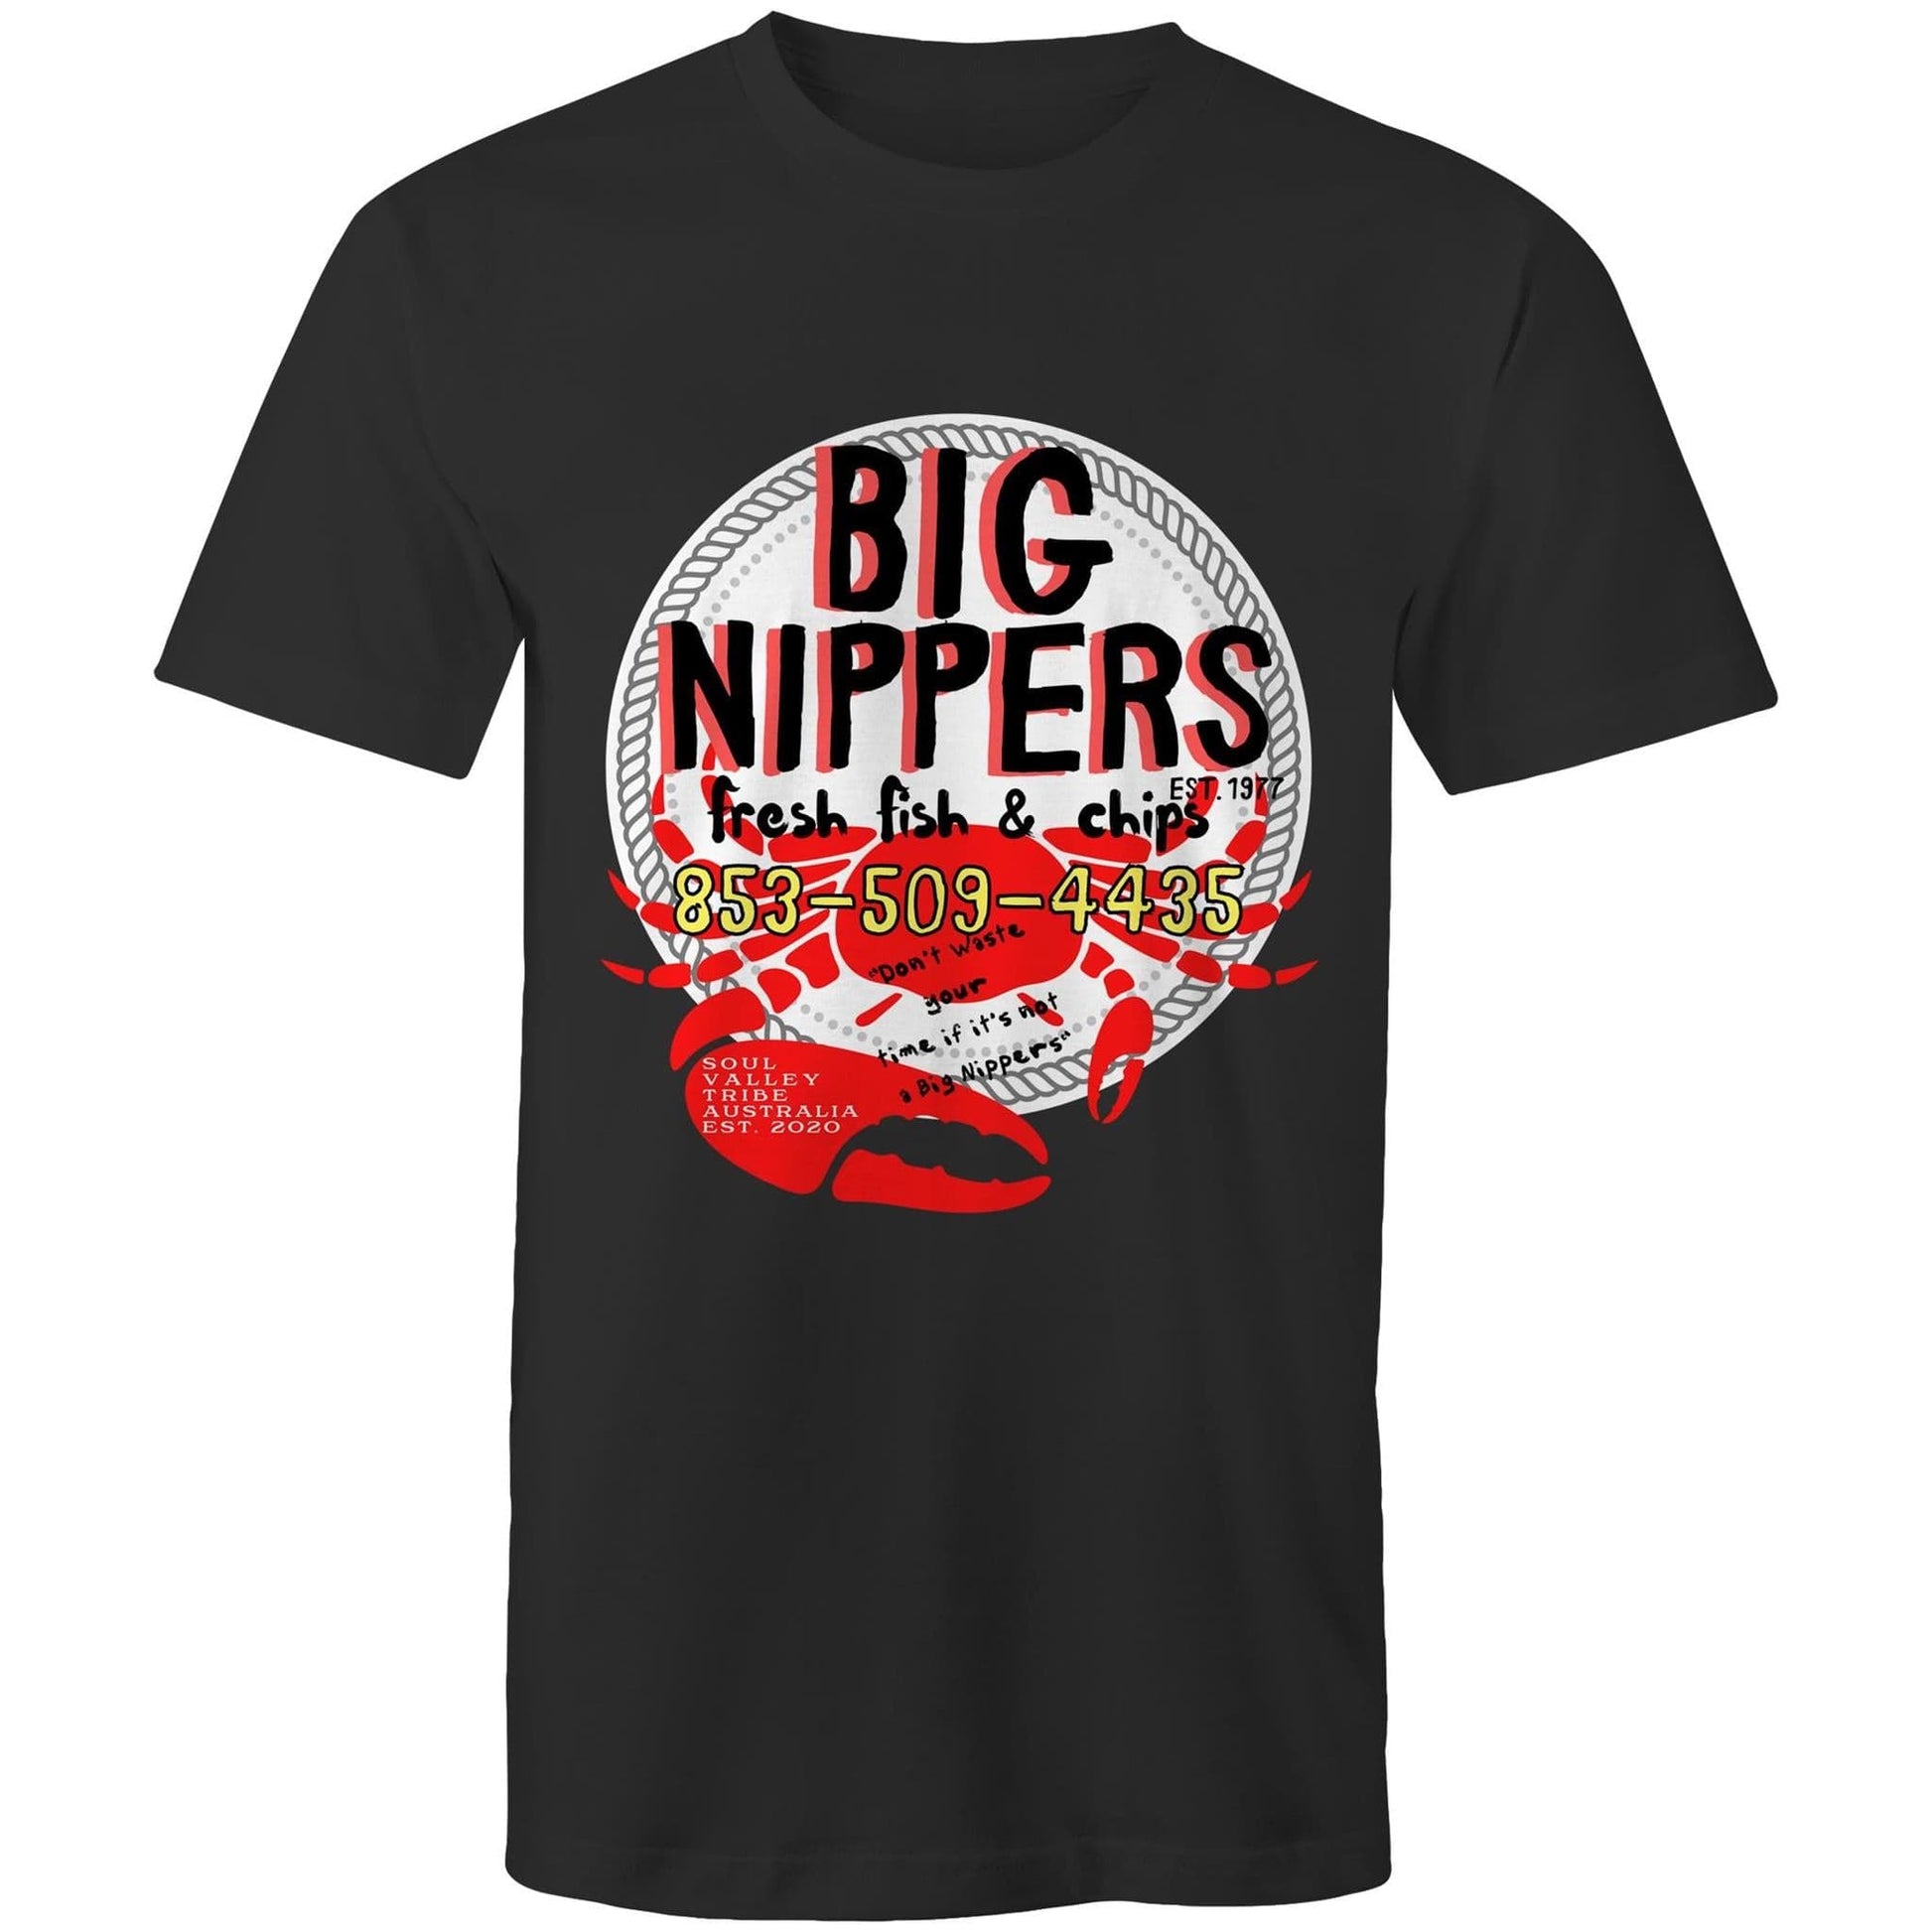 Ogo Merch Big Nippers Fish & Chips Graphic Tee Black / Small